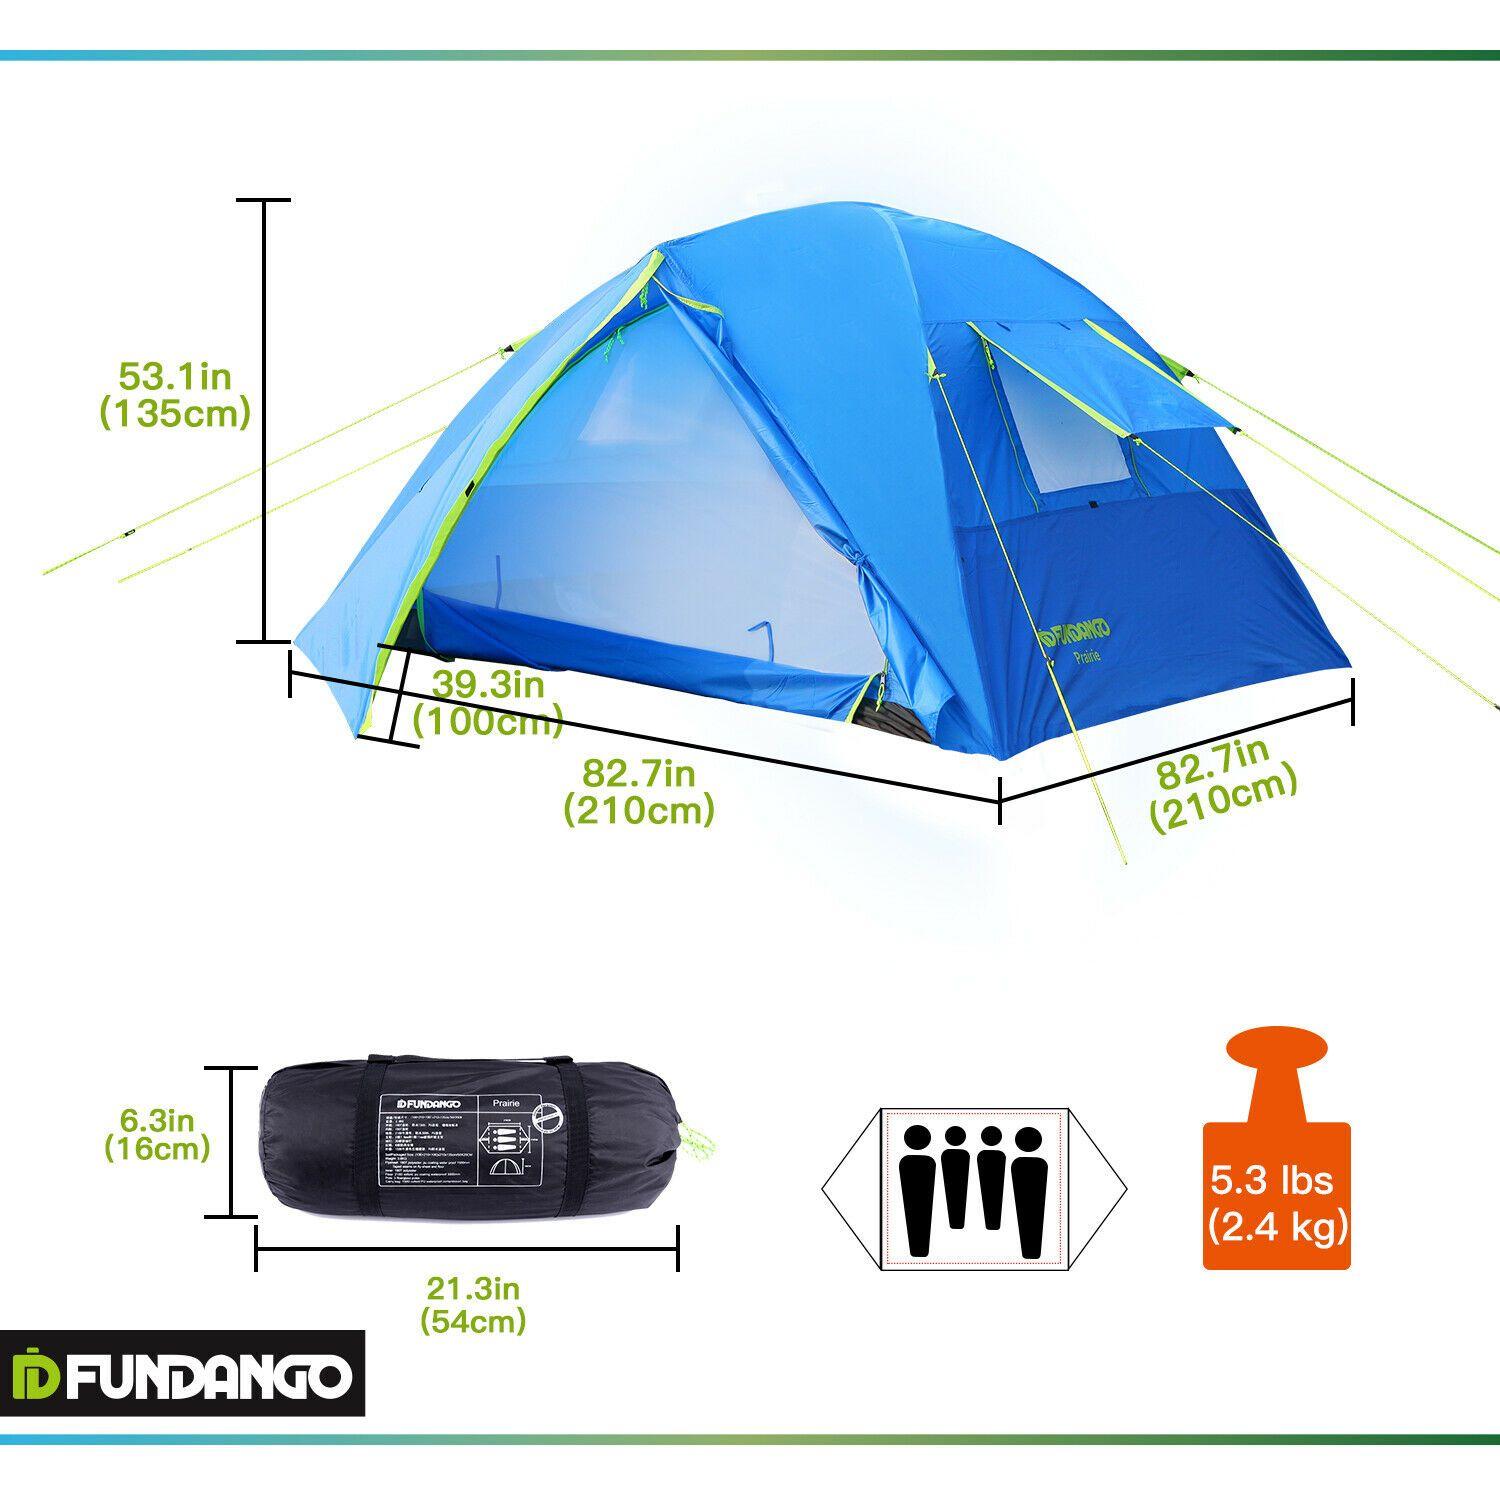 3 Blue Person Logo - FUNDANGO 3 Person Dome Camping Tent with Bag Blue and Gray Portable